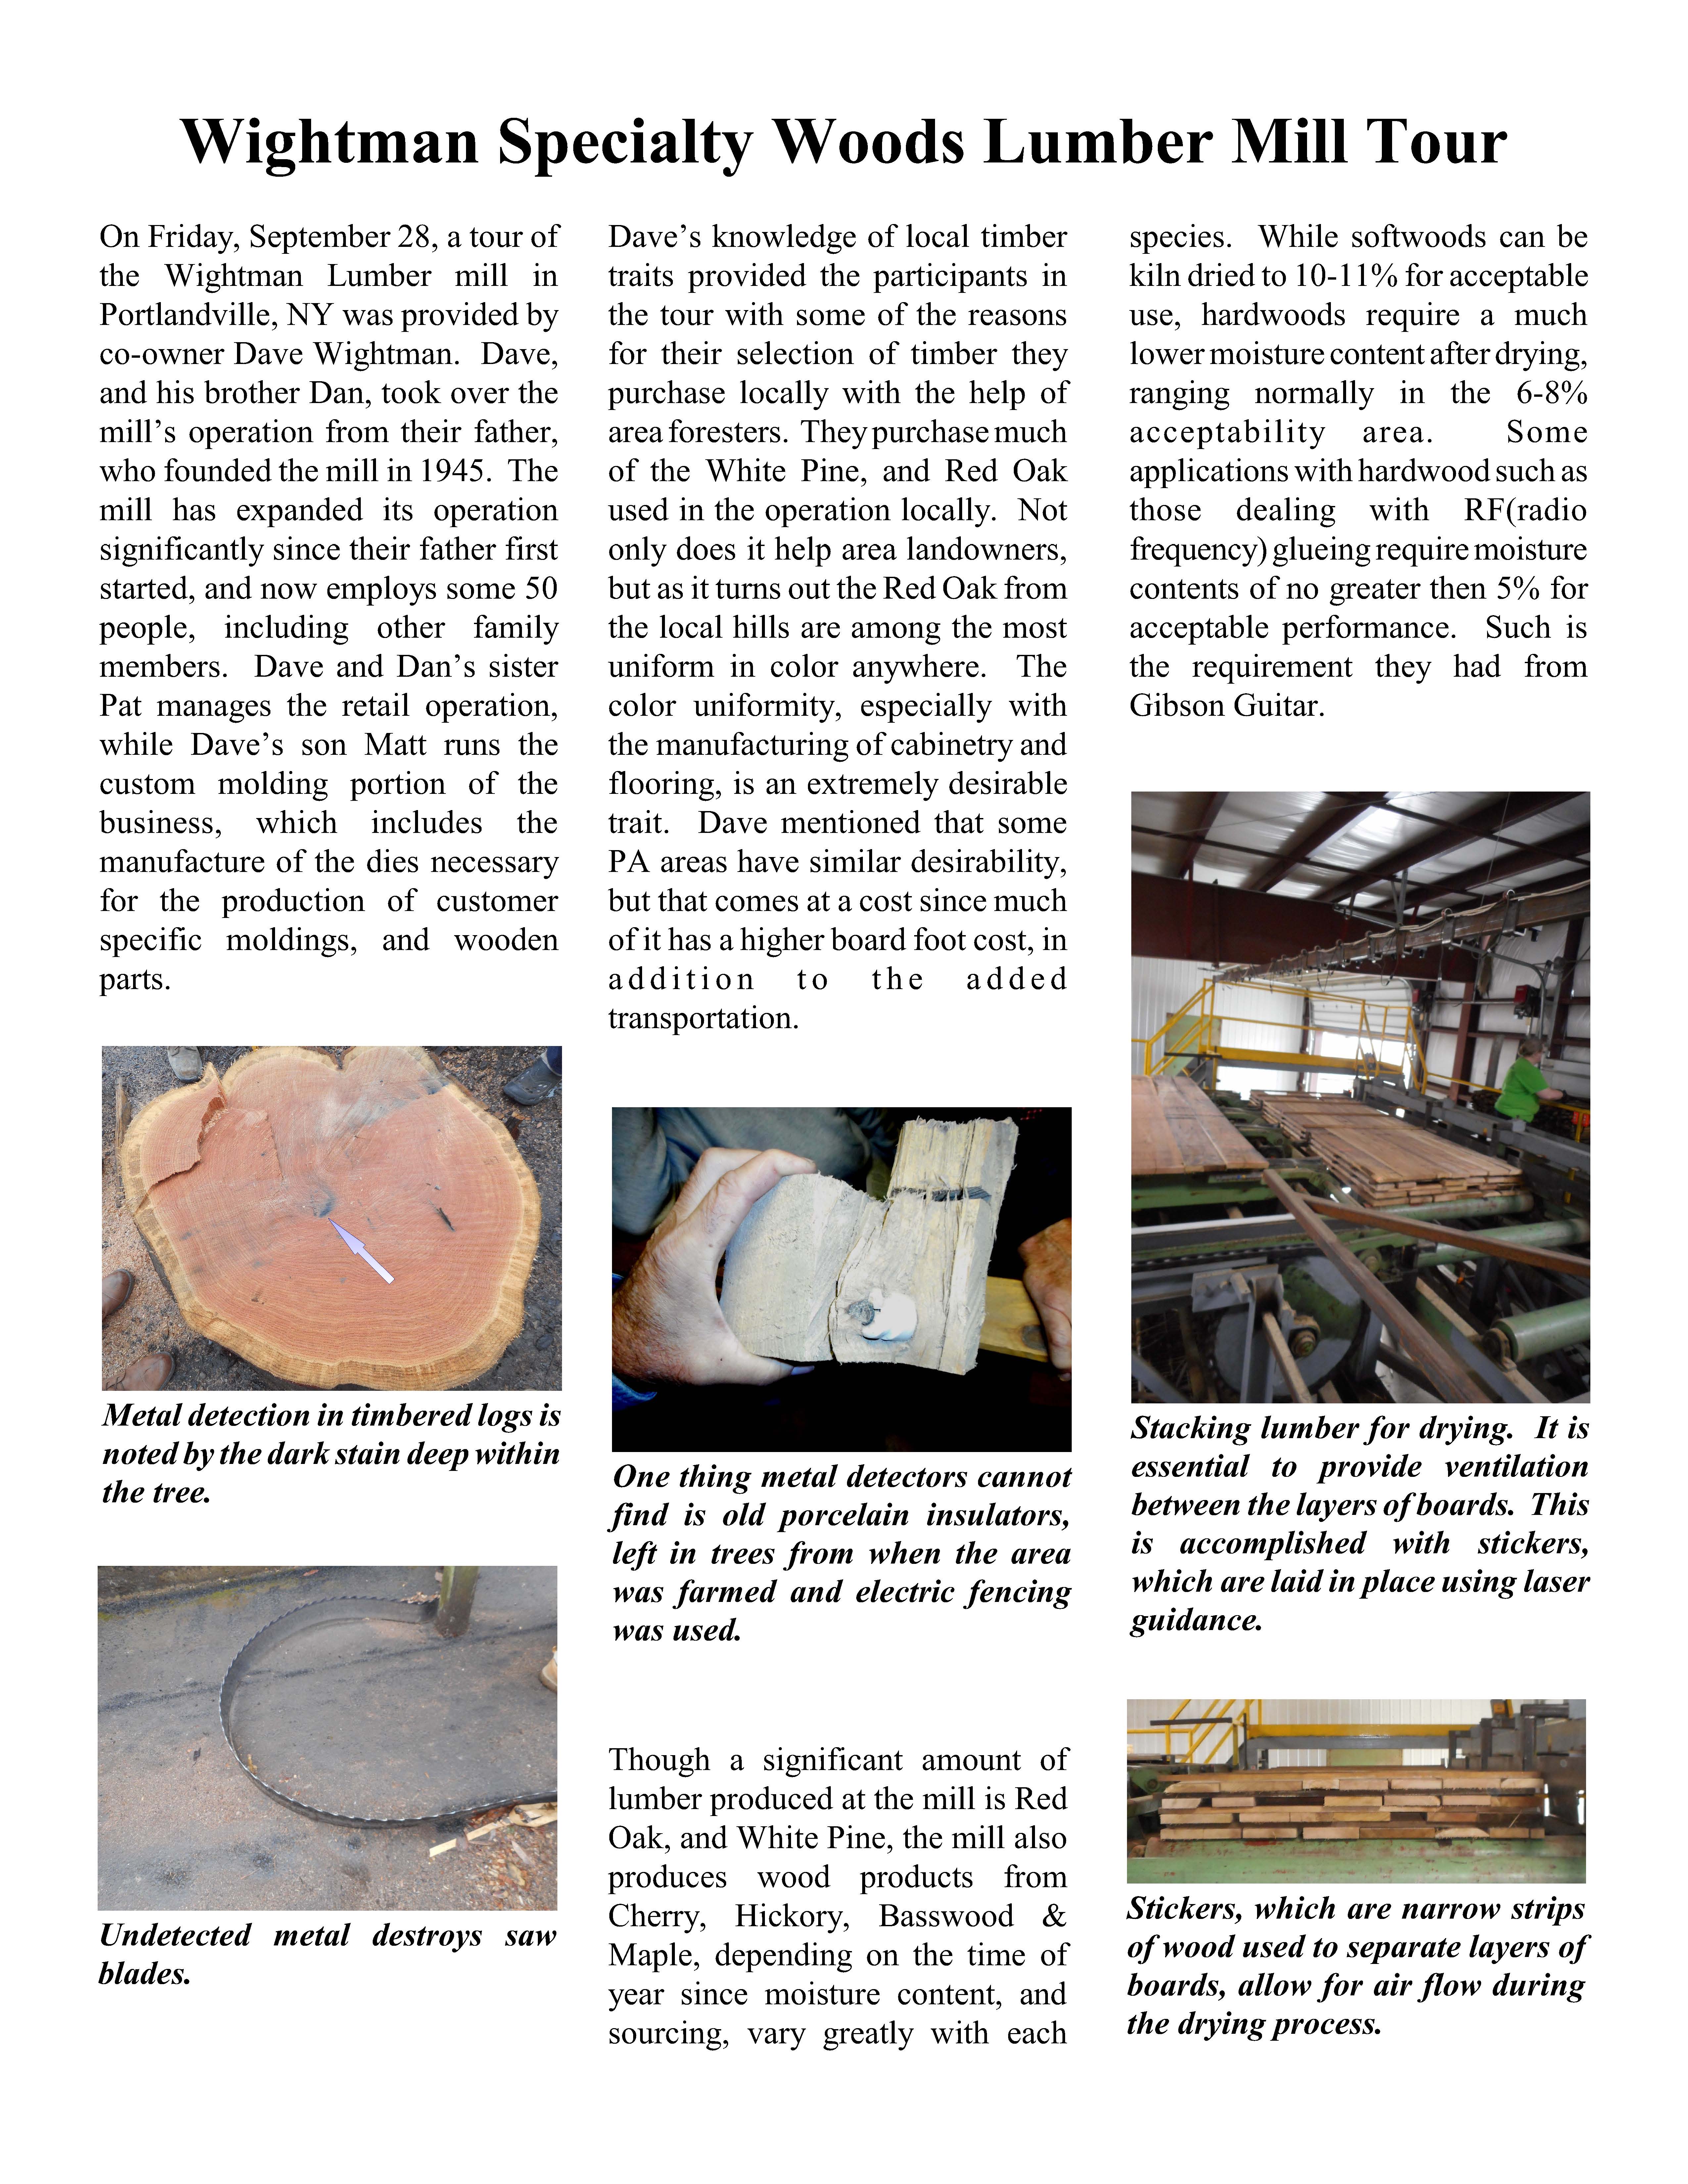 Wightman_Specialty_Woods_Lumber_Mill_Tour-1_Page_1.jpg